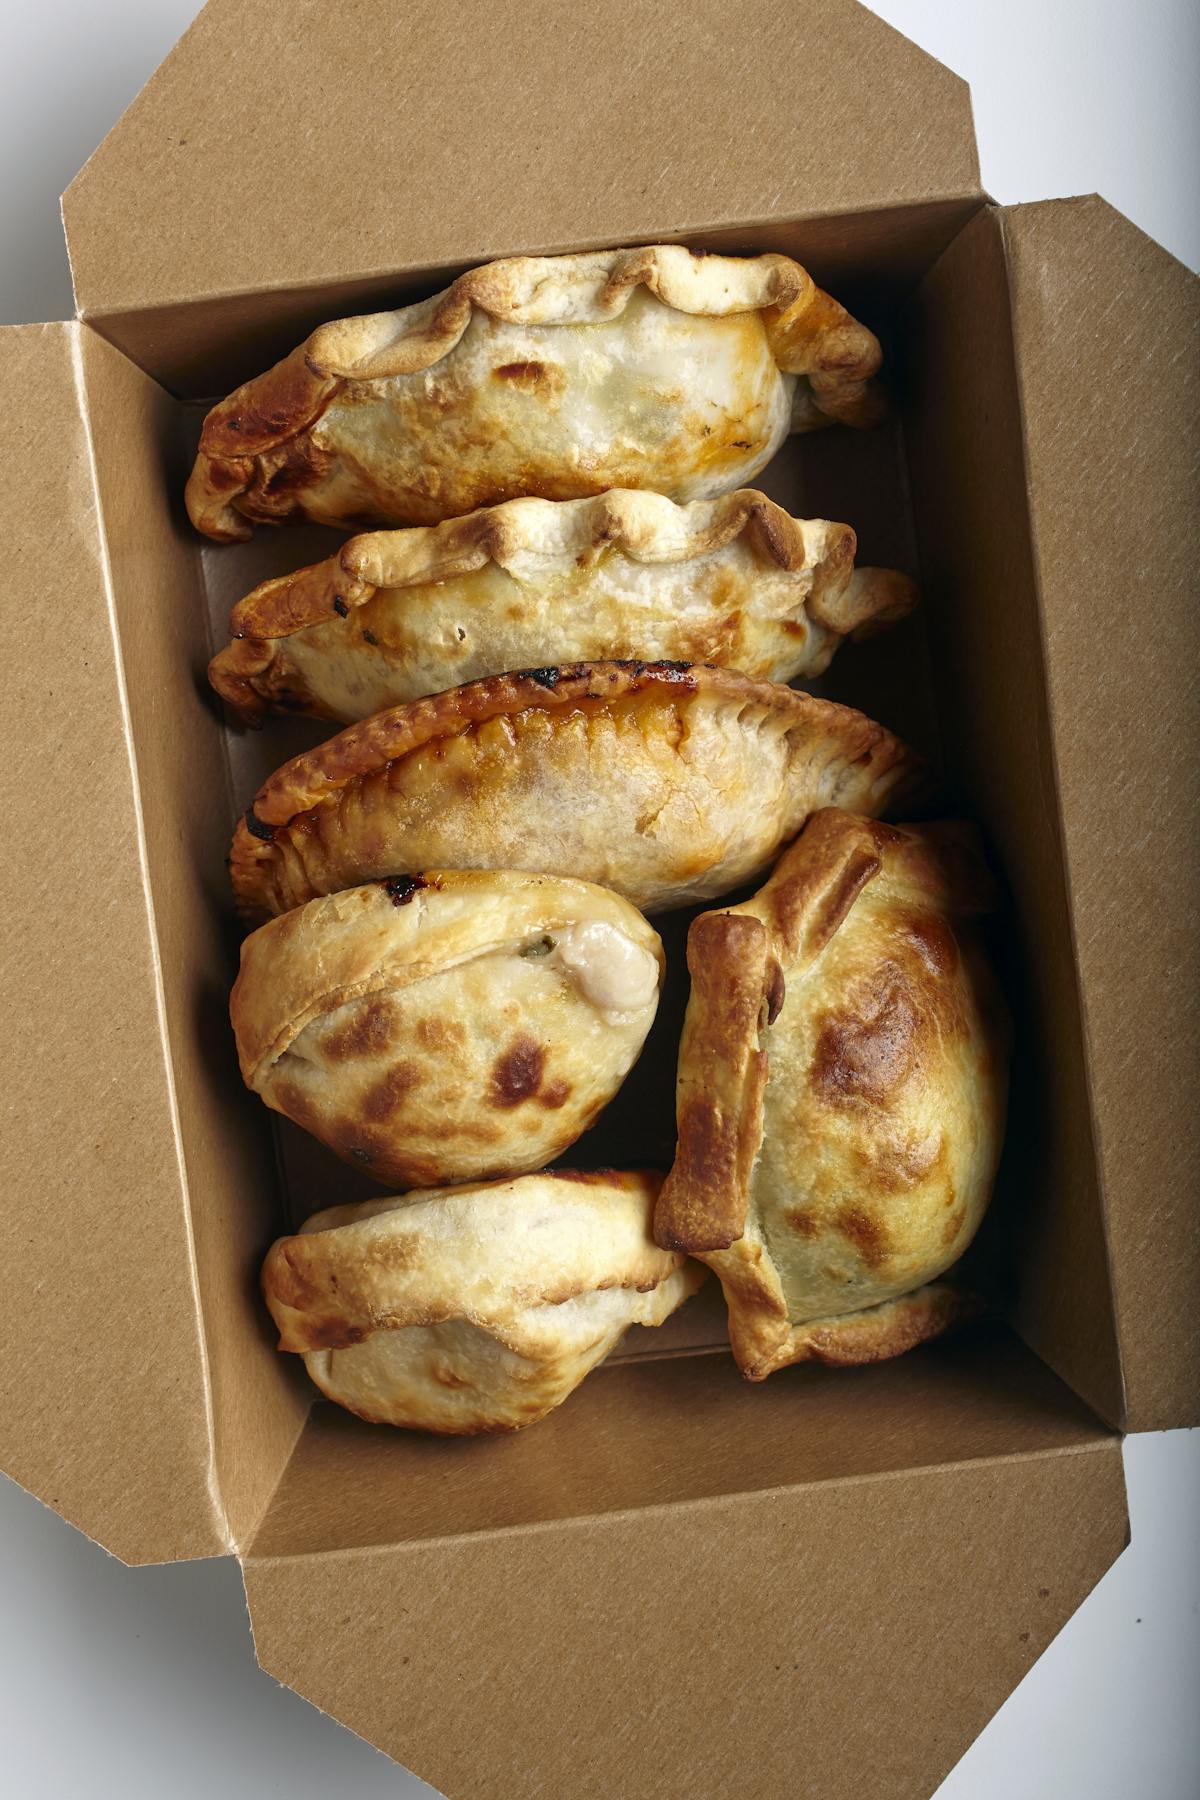 a box filled with different types of bread